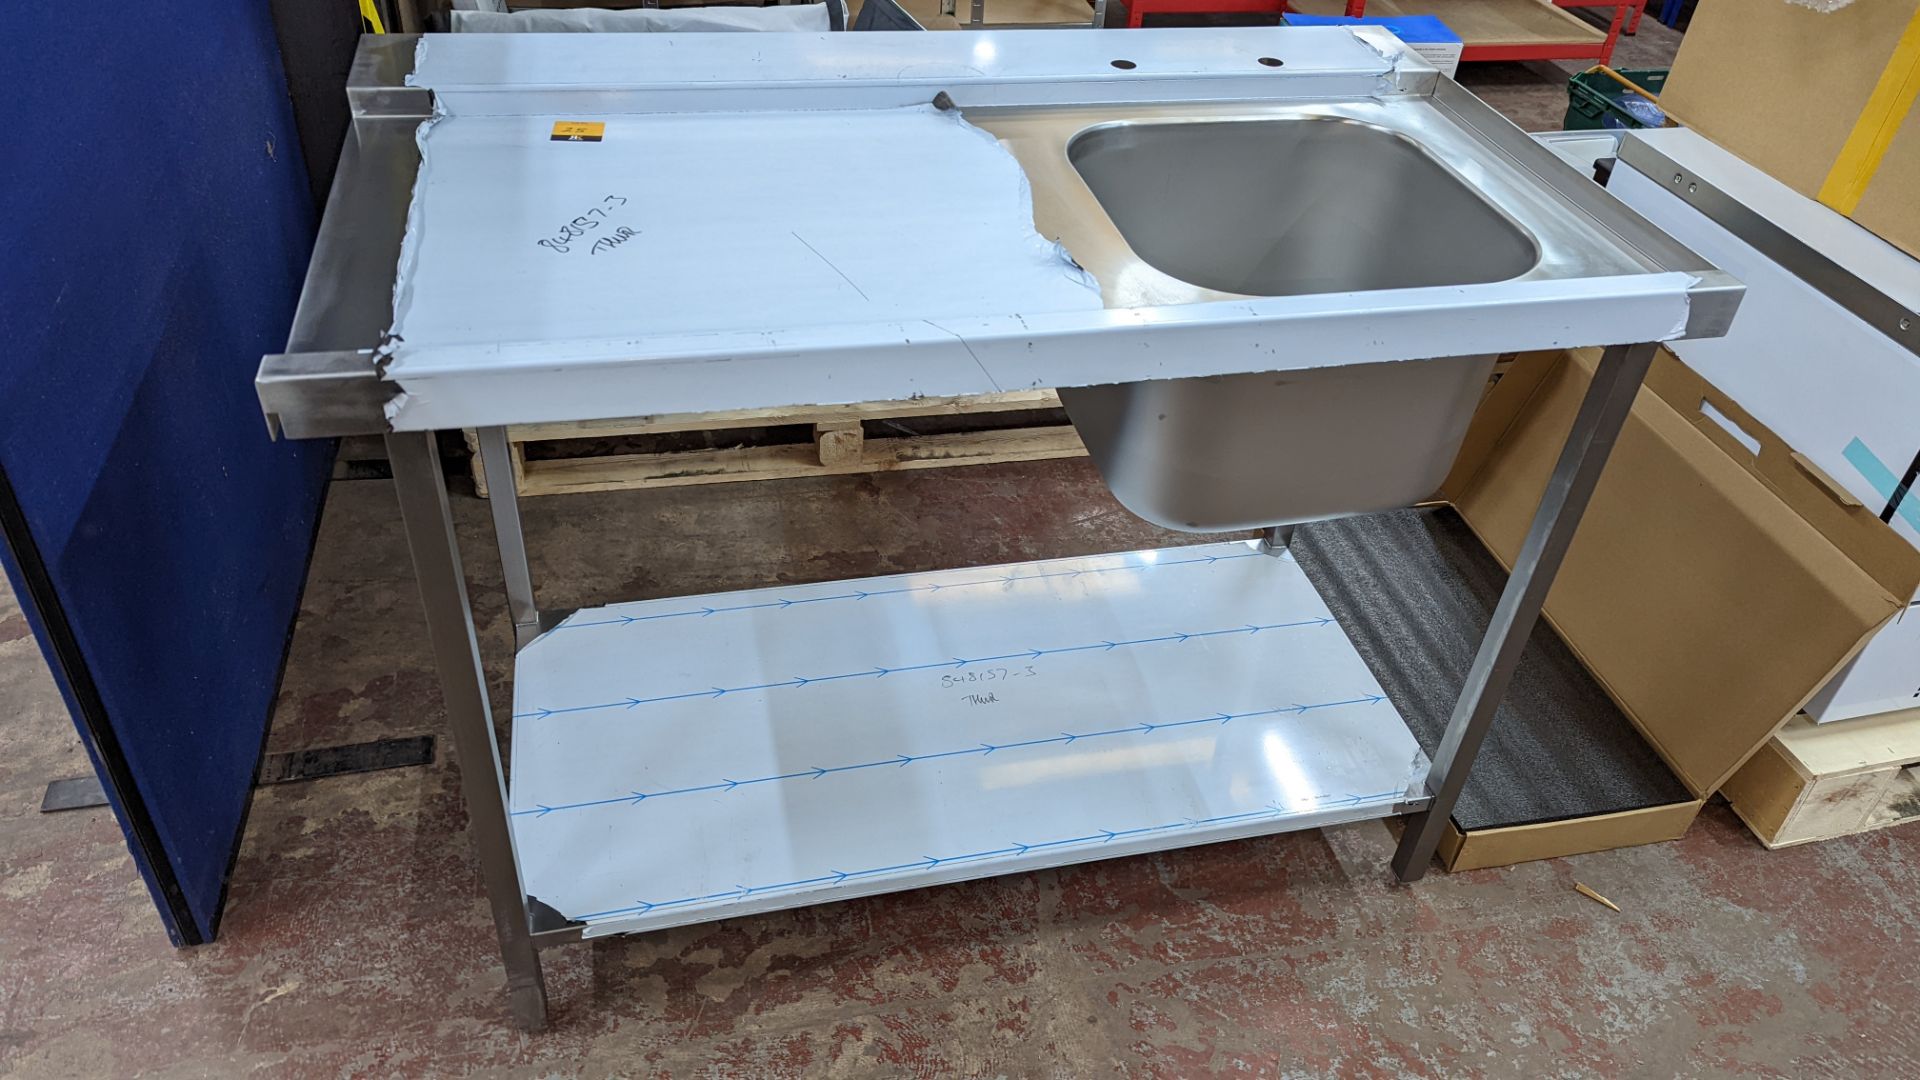 Stainless steel dishwasher table incorporating single bowl sink, max external dimensions 1200 x 700 - Image 2 of 6